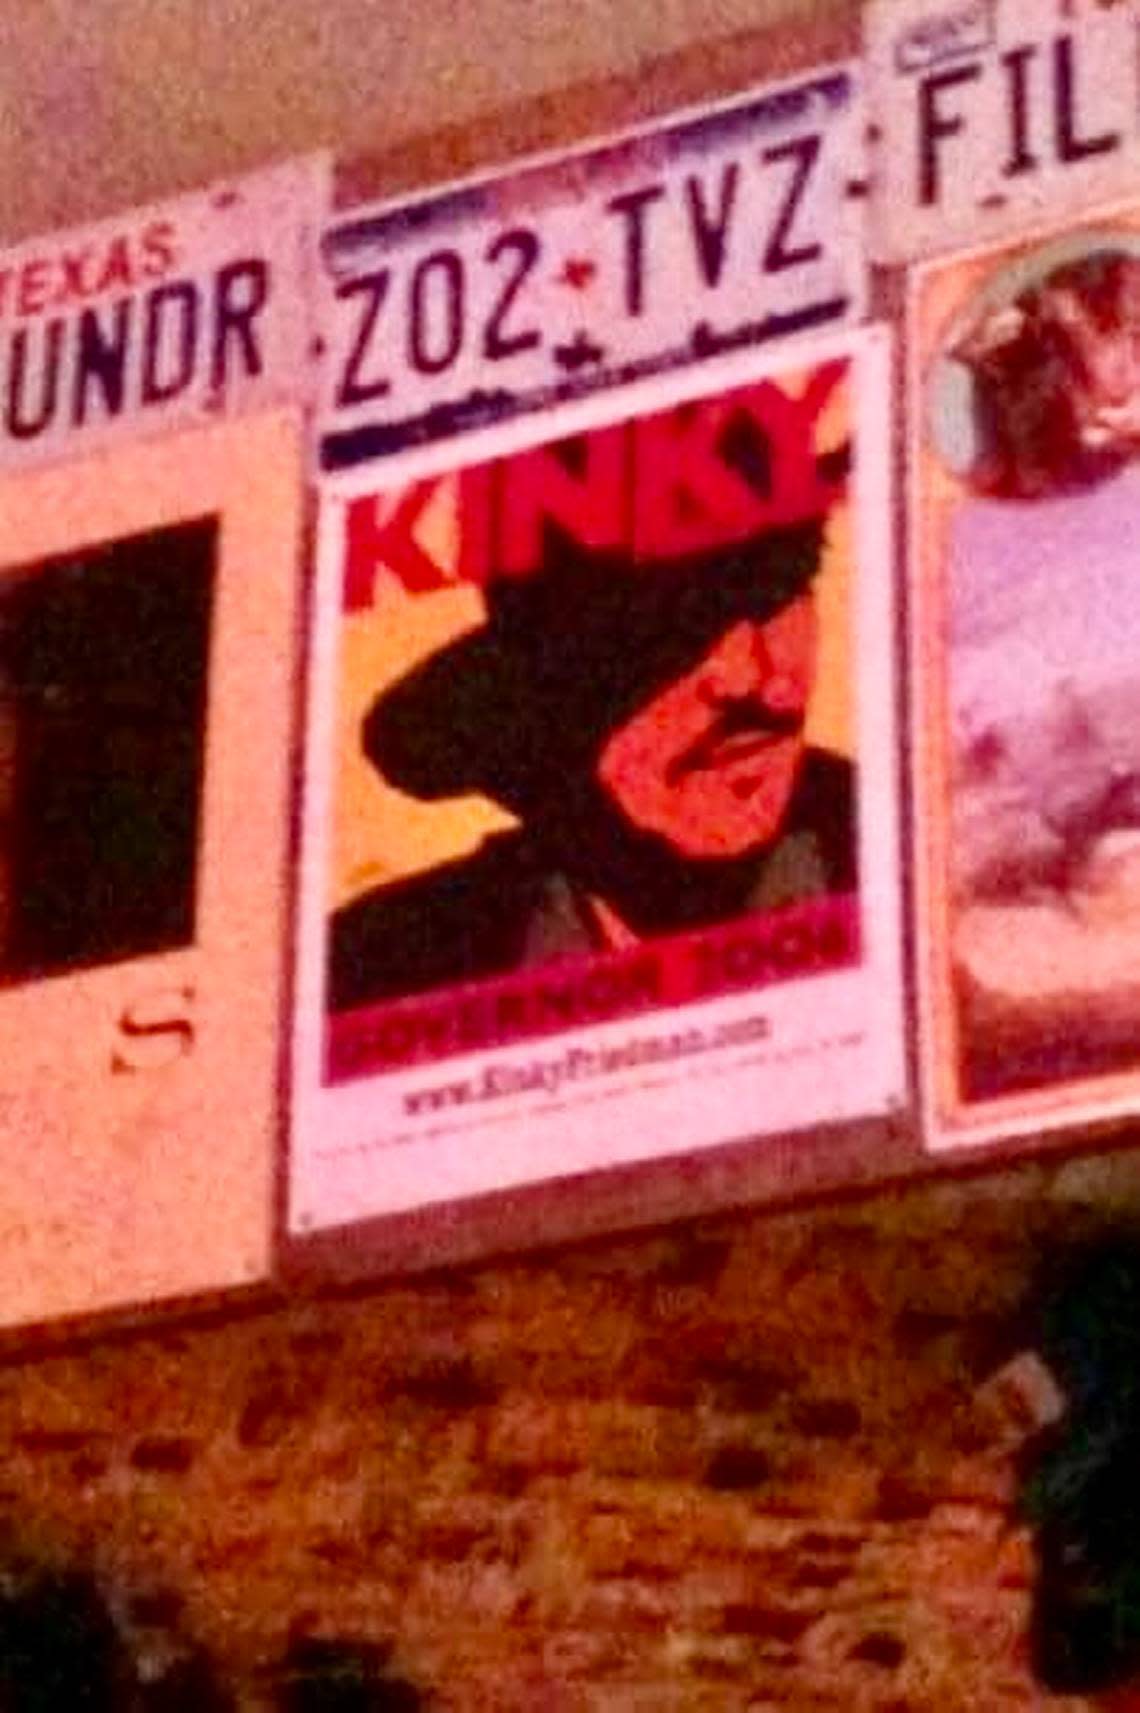 The Texaz Grill in Phoenix features a campaign poster from humorist Kinky Freidman’s 2006 campaign for governor. He recived 13% of the vote.